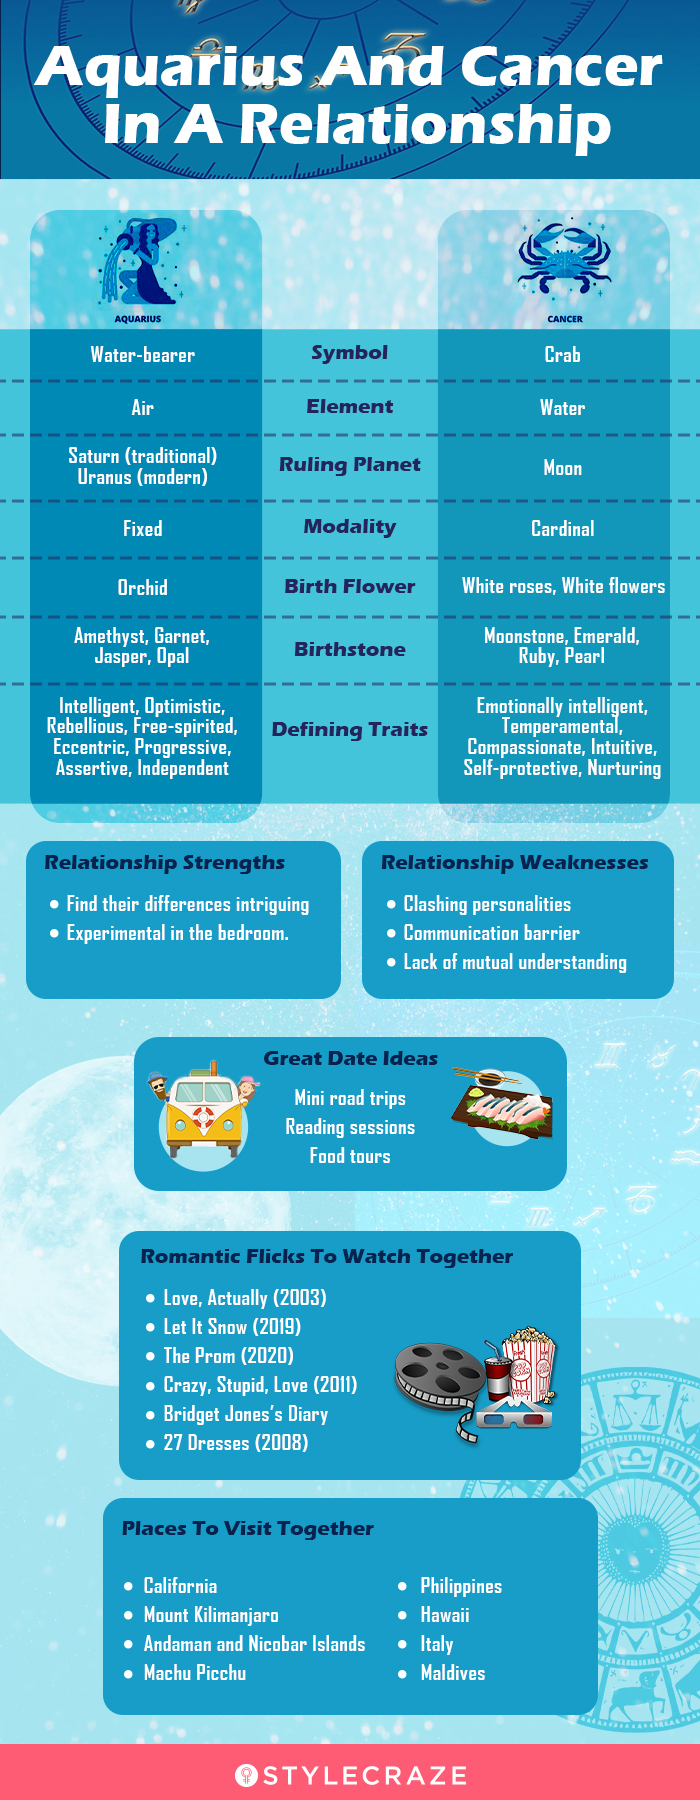 aquarius and cancer in a relatioship (infographic)